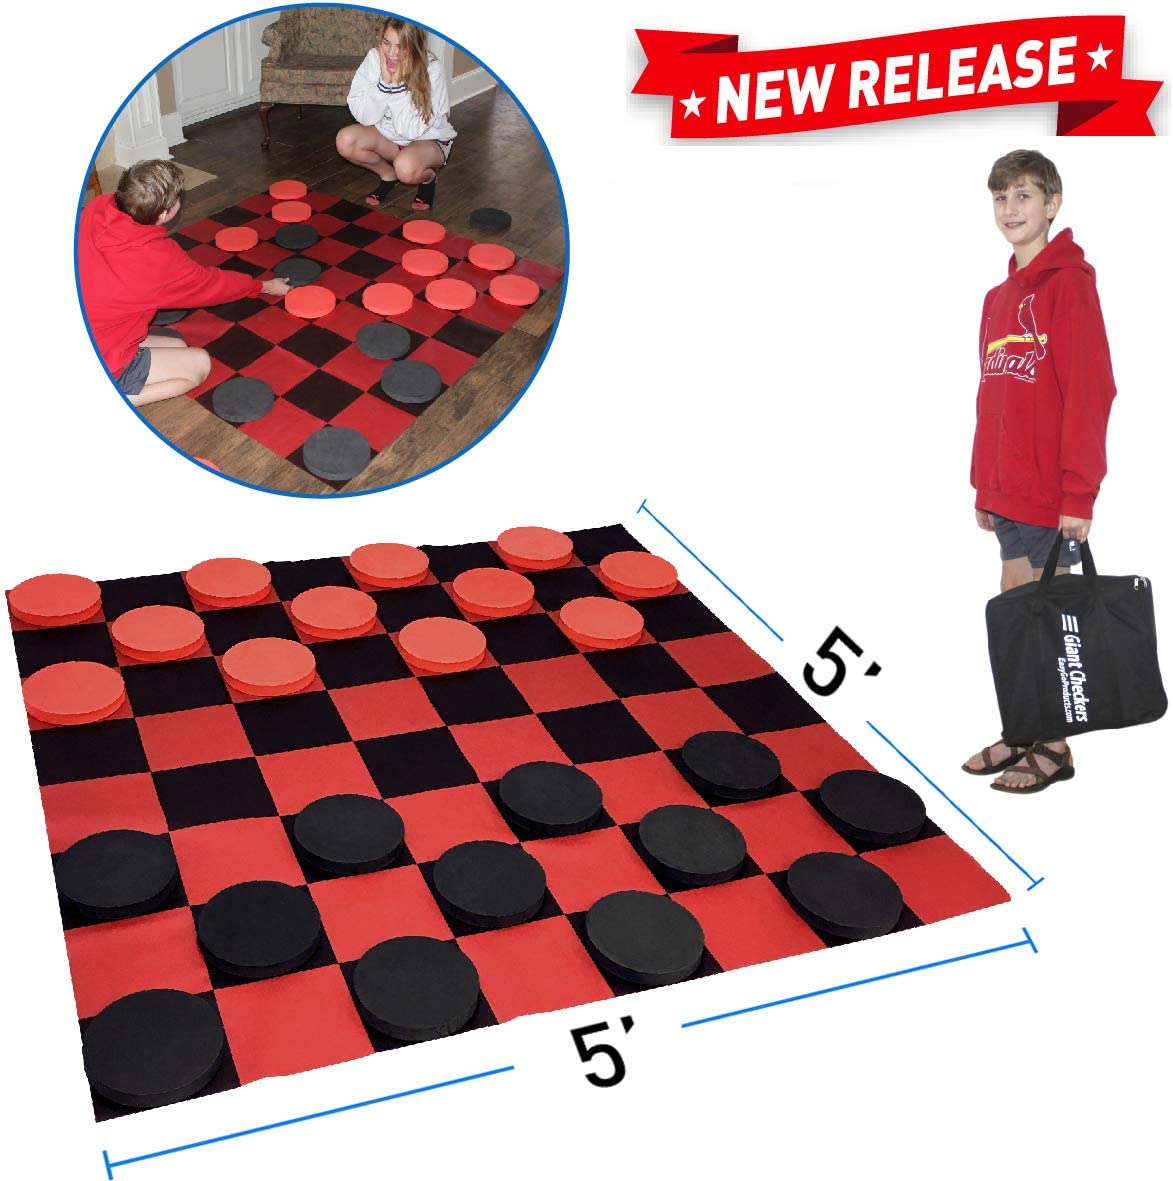 Giant checker board with kid holding carry case